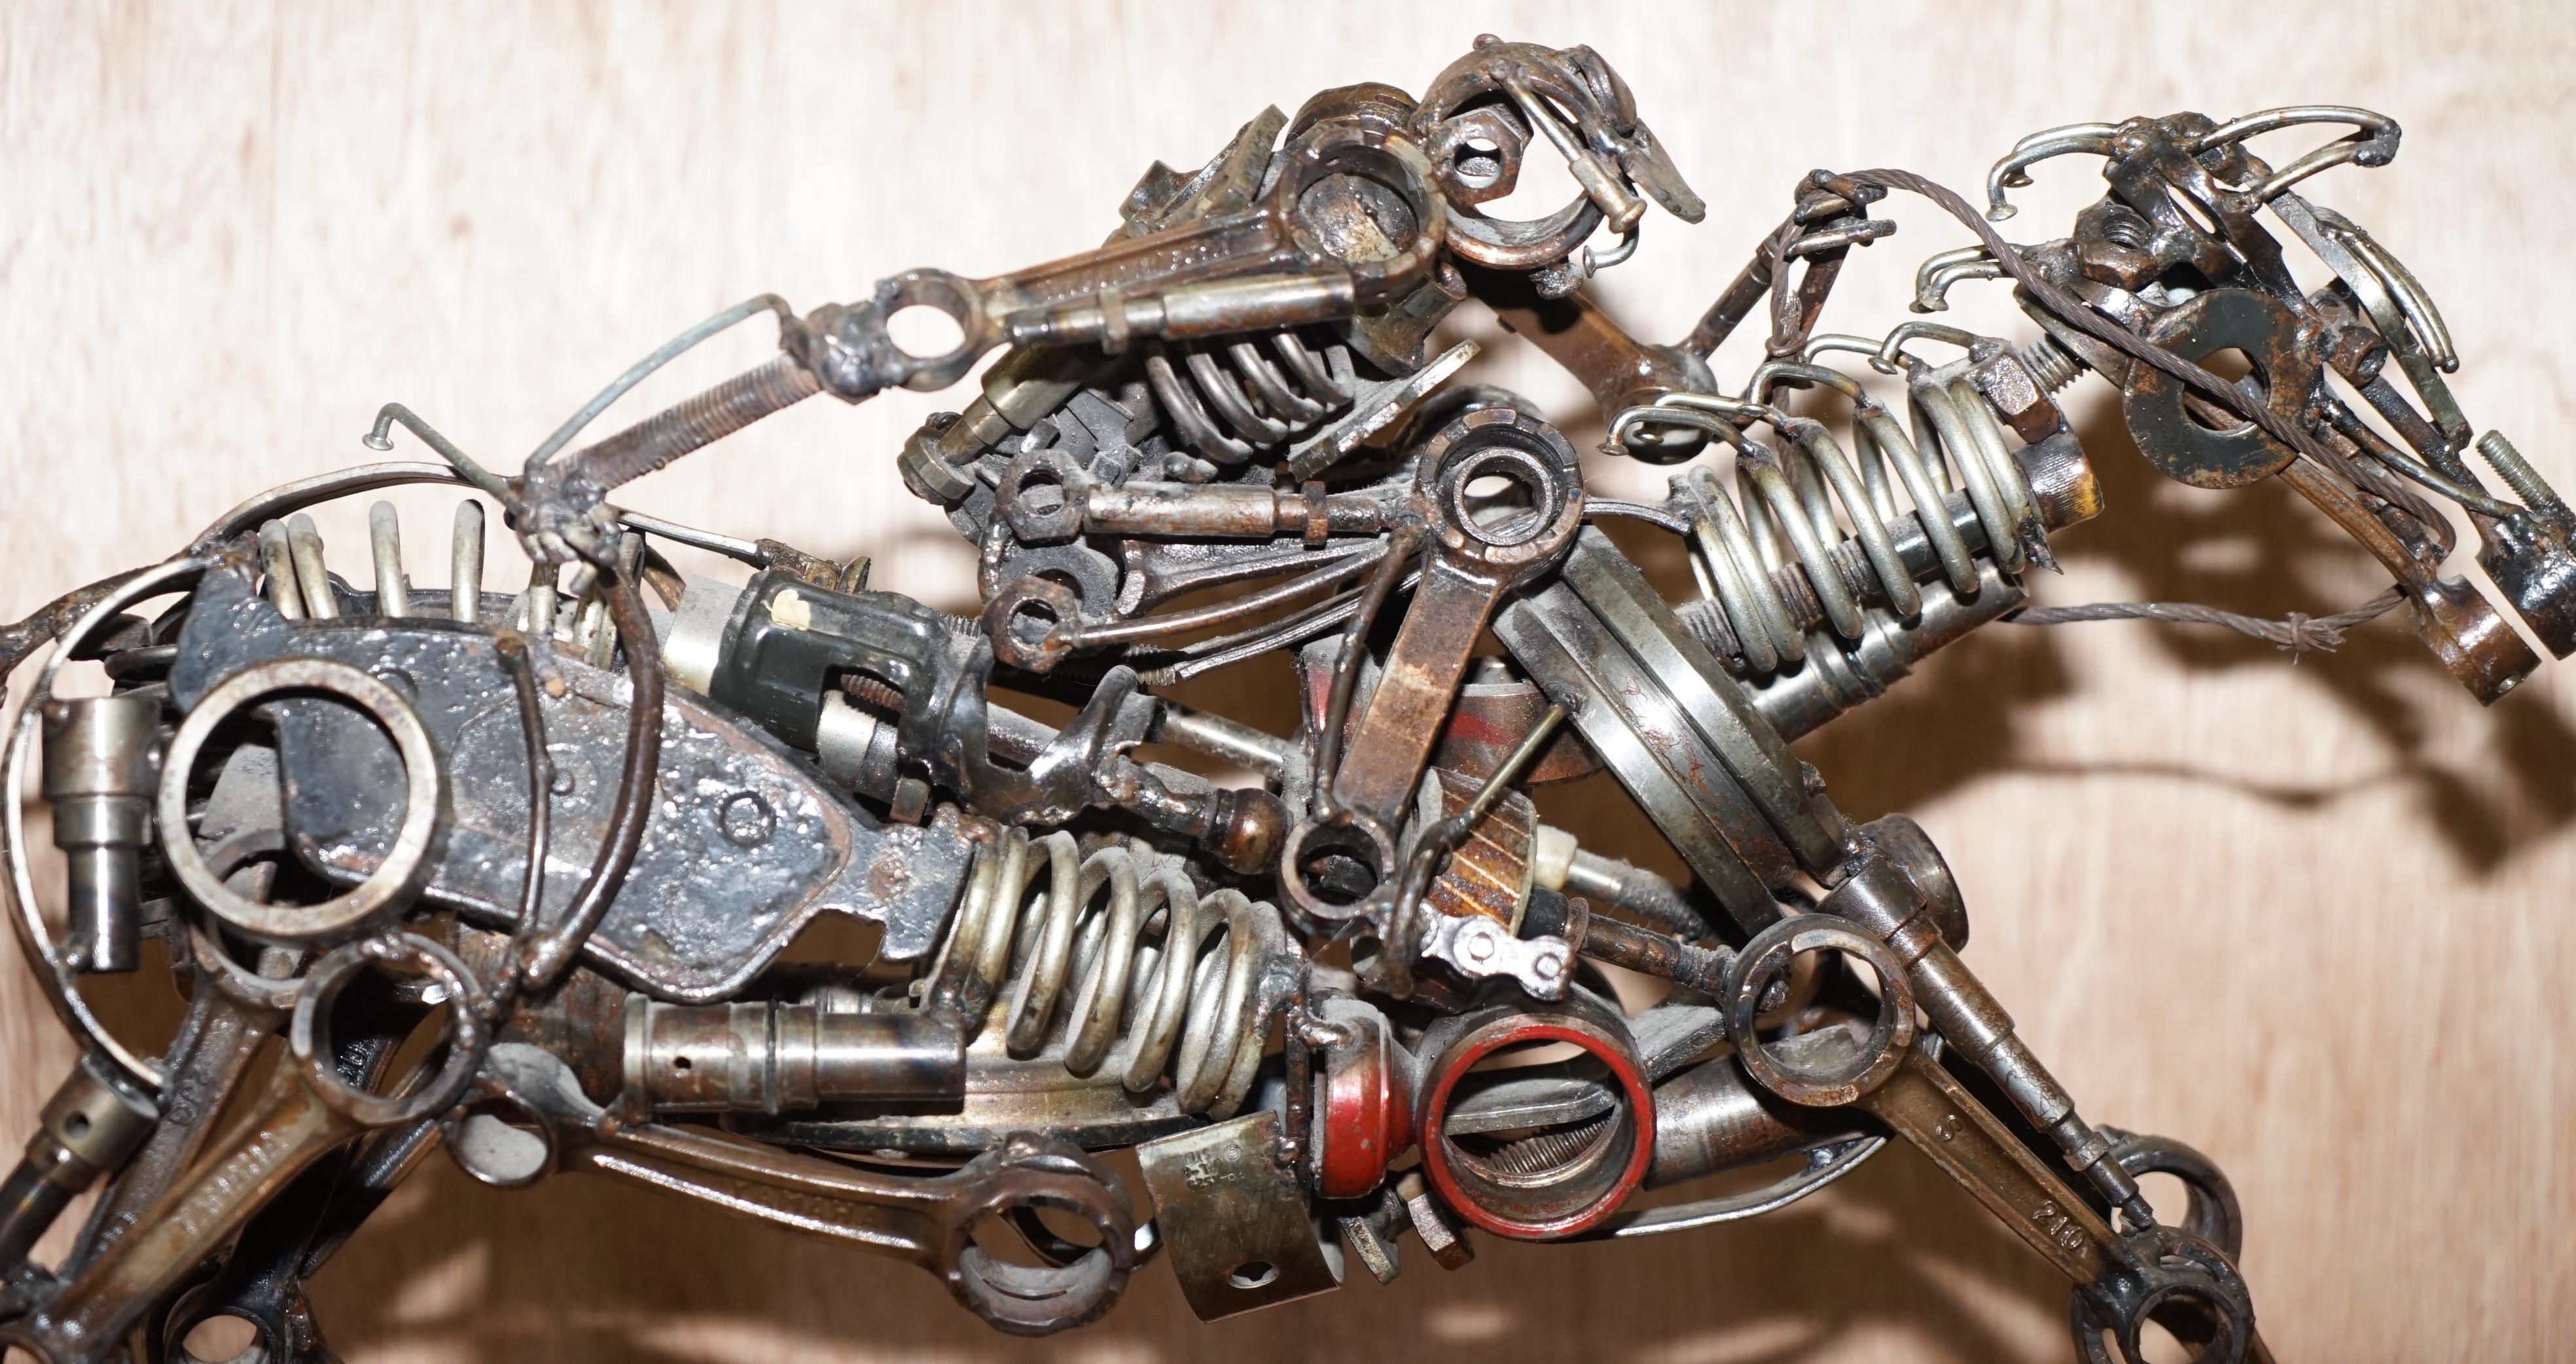 English Rare Pair of Motorcycle Parts Scrap Metal Made Sculptures of Solders on Horses